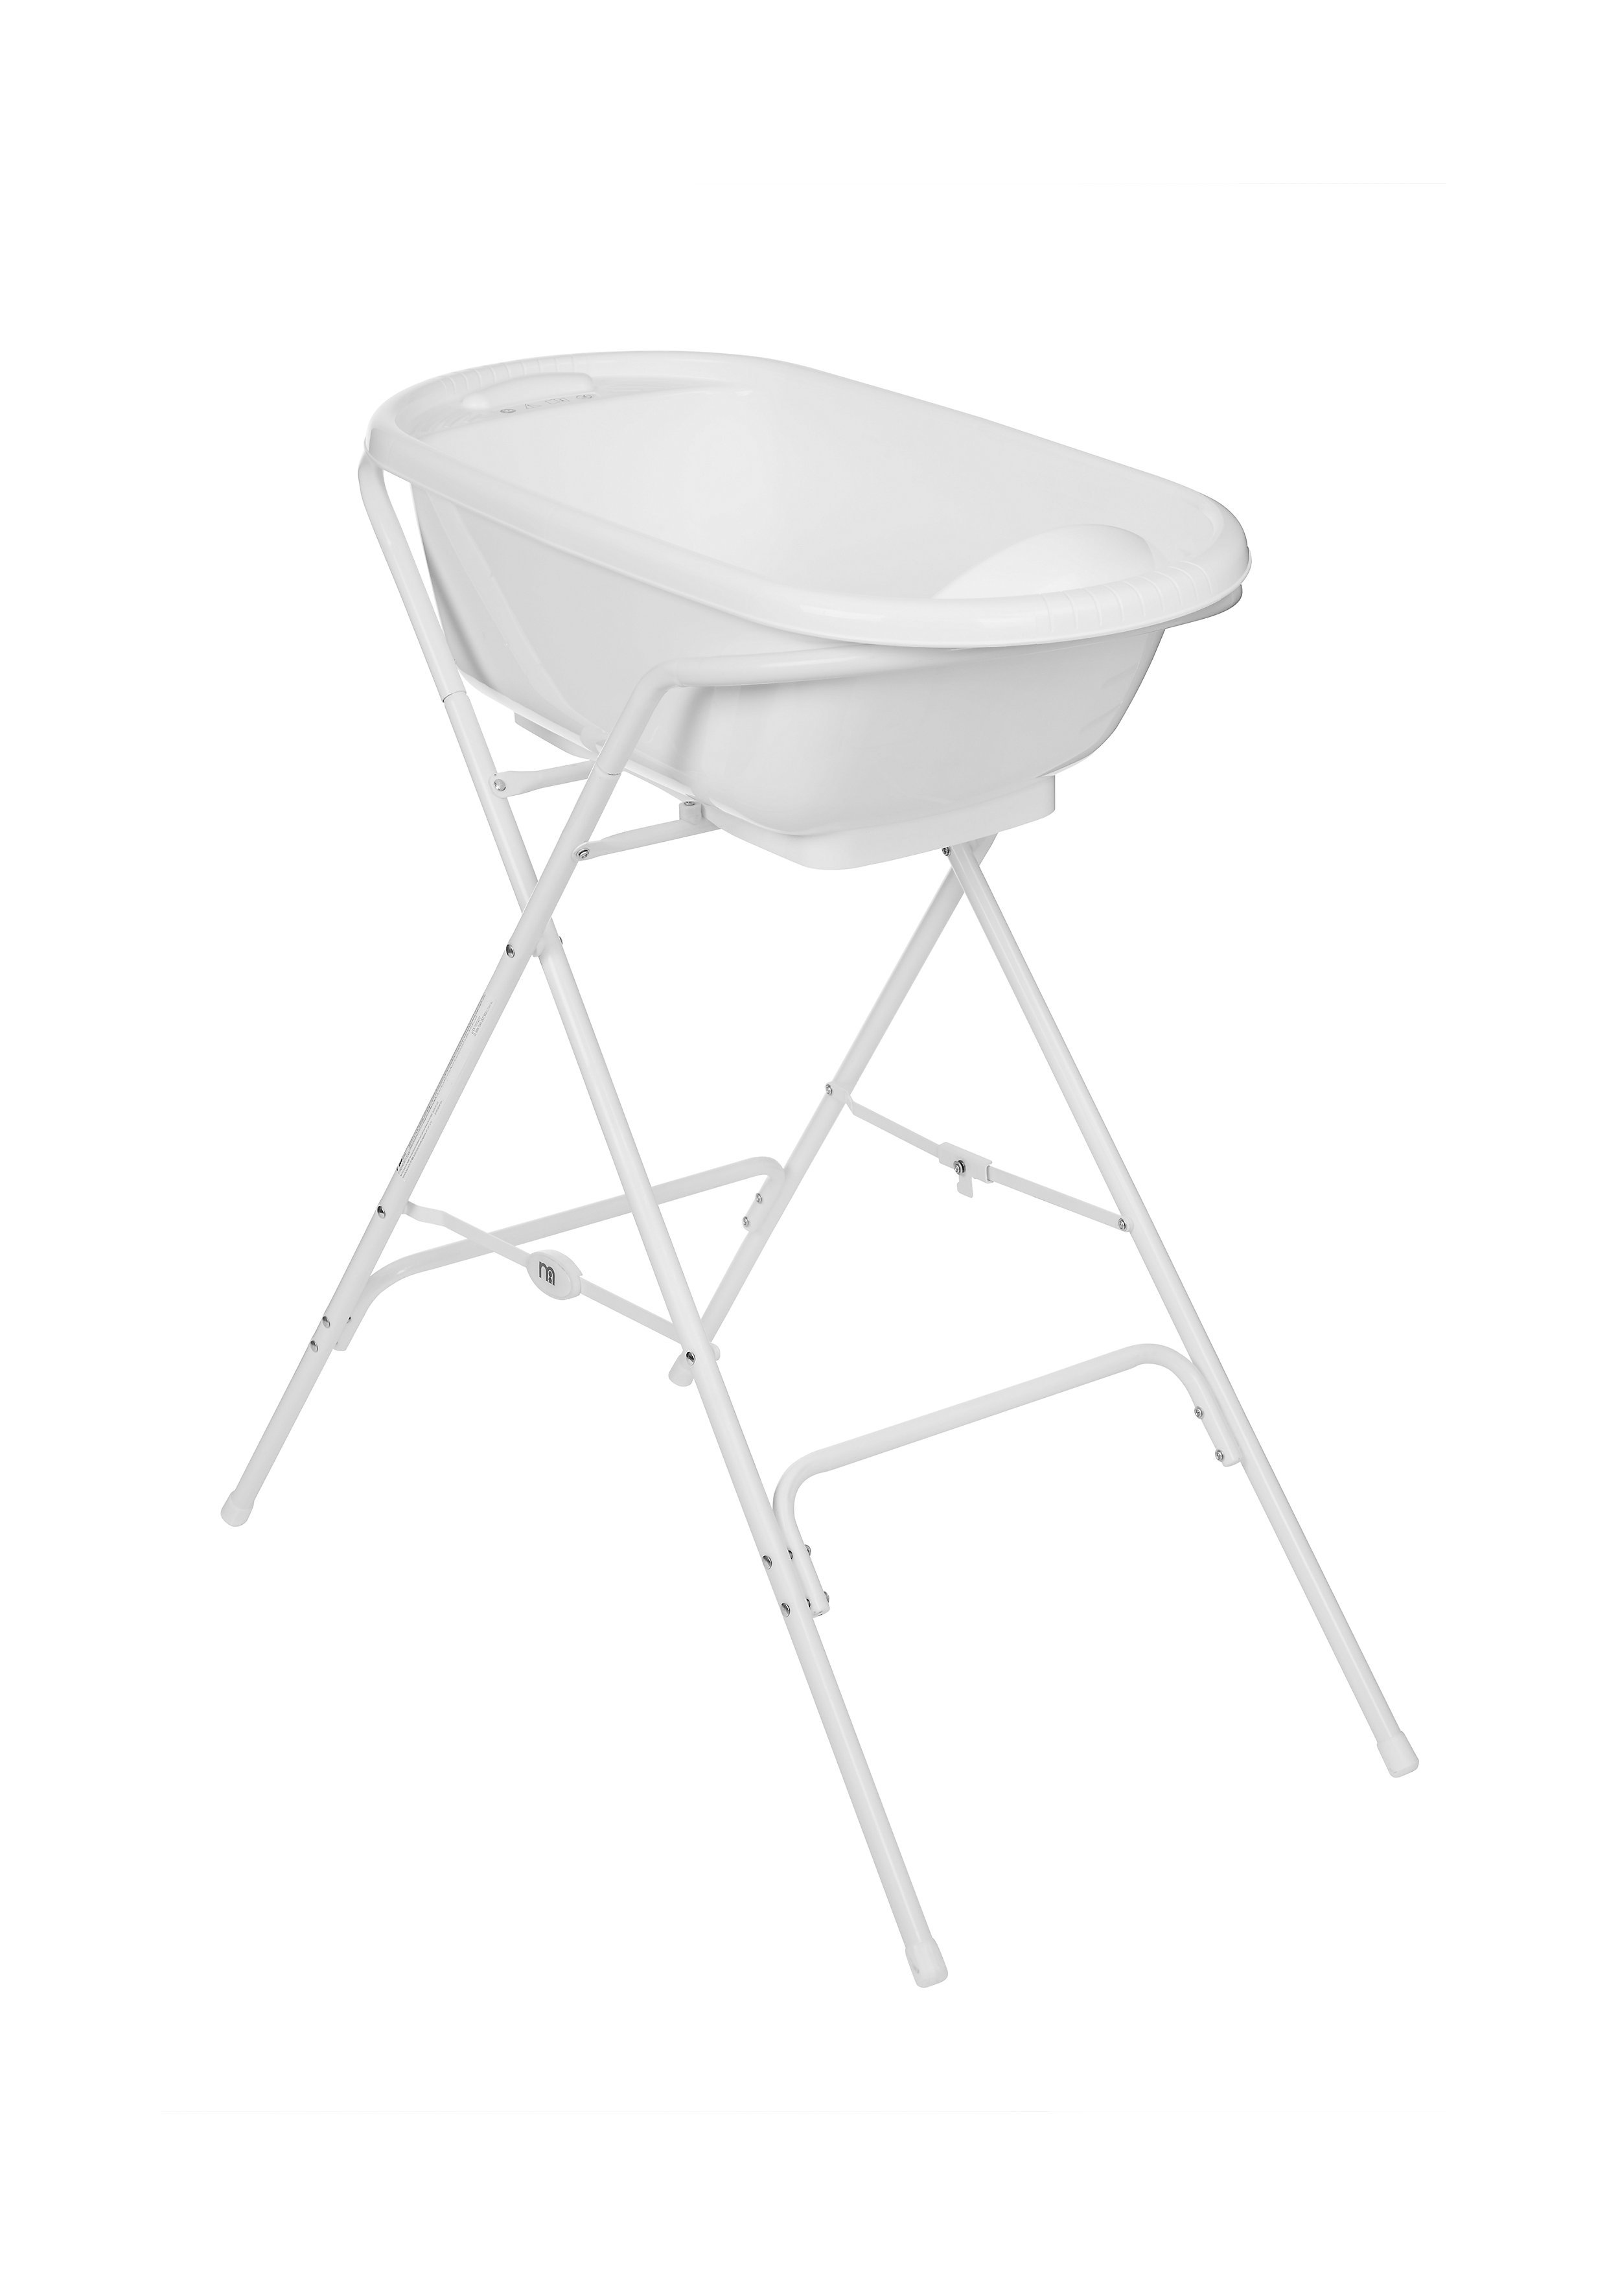 Mothercare | Mothercare Bath Stand Standard White 3